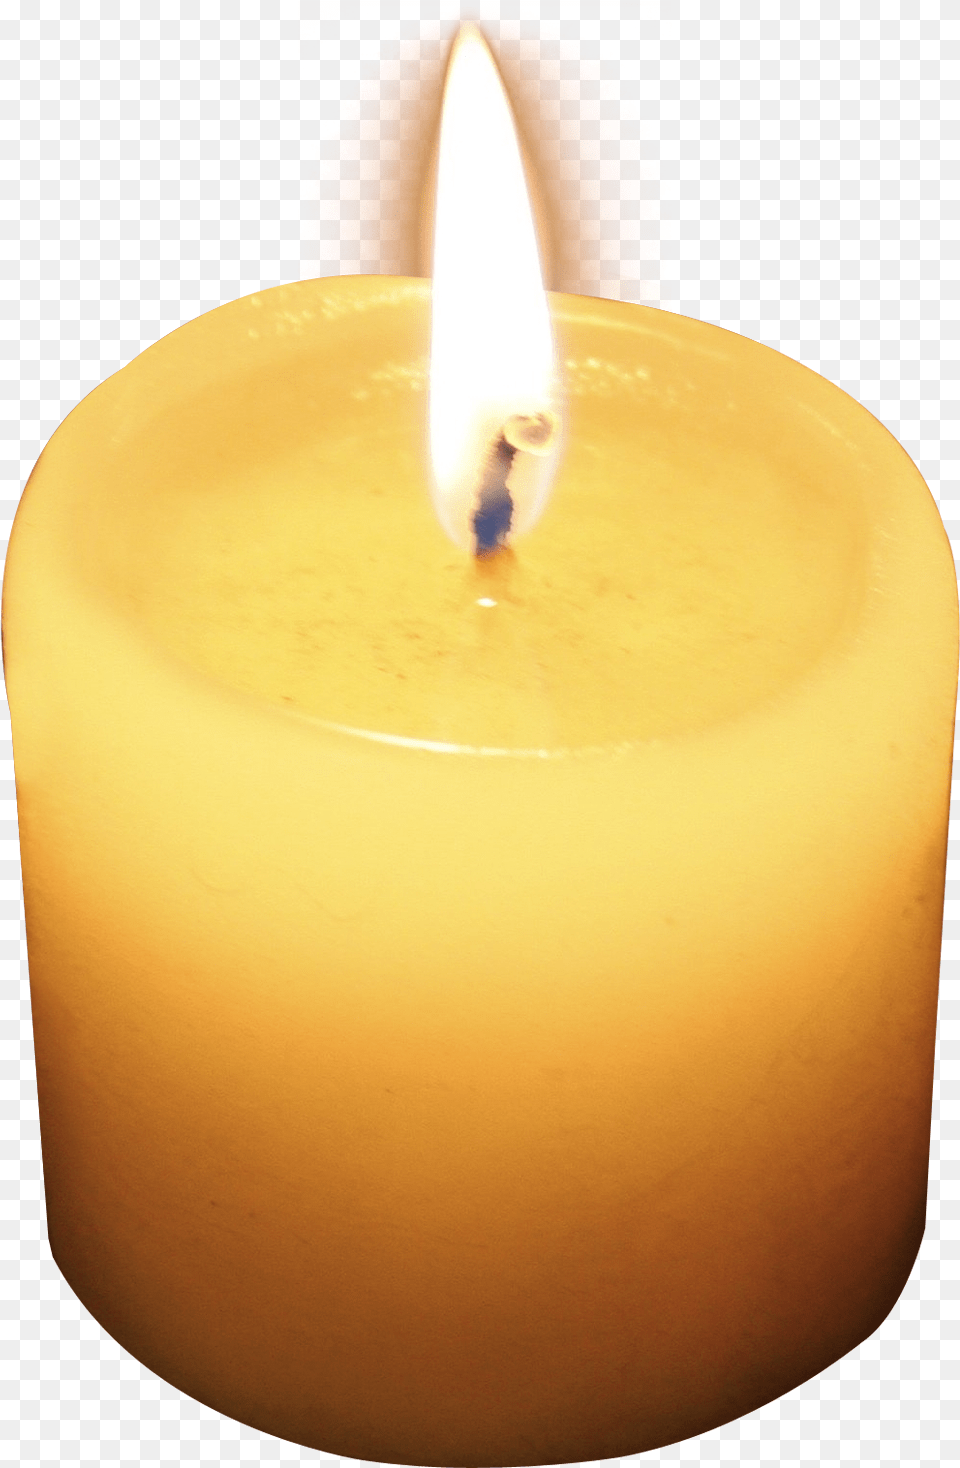 Middle Hongling Icon School Candle File Hd Clipart Candle Gif Transparent Background, Fire, Flame Png